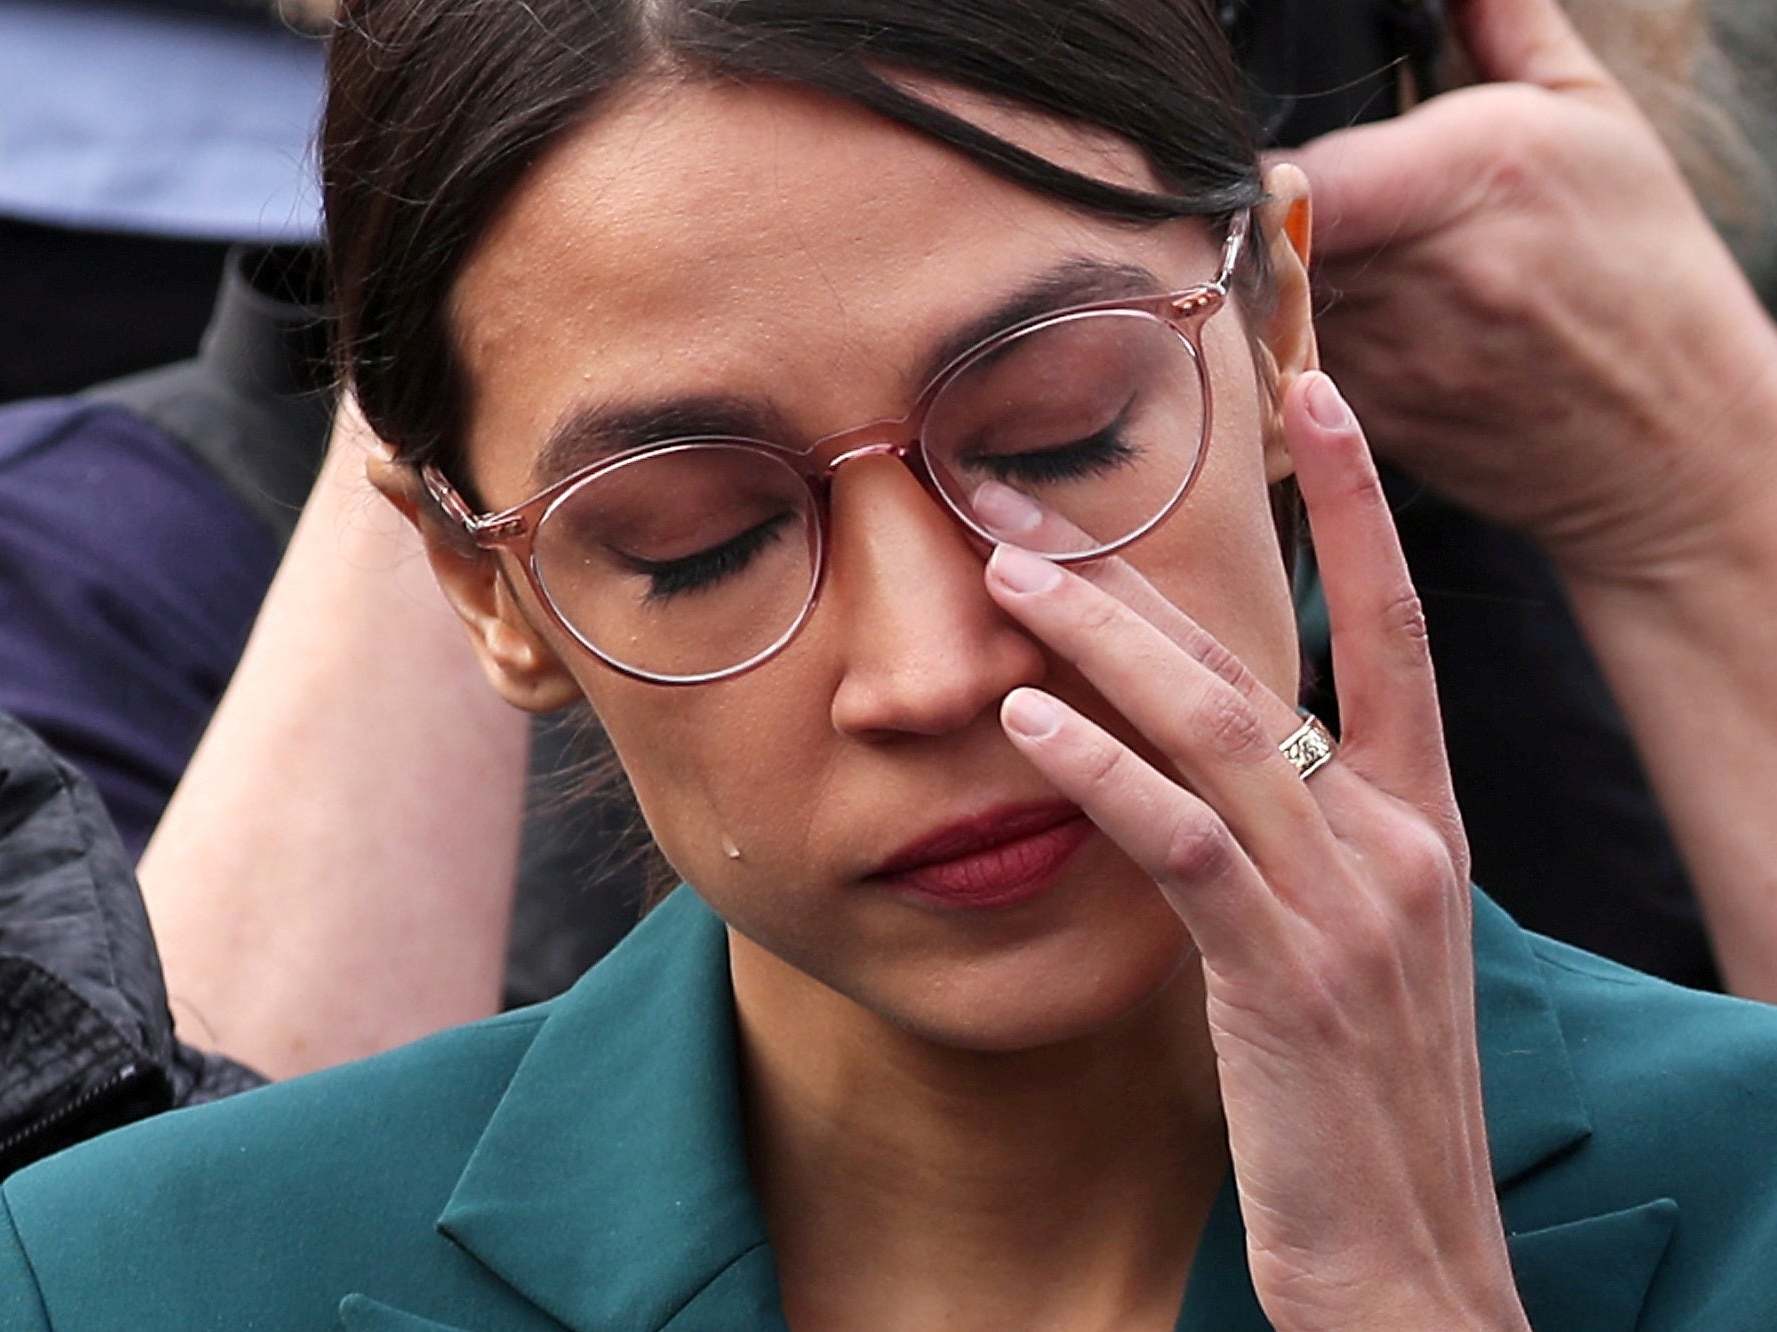 'My family relied on food stamps,' Ms Ocasio-Cortez wrote